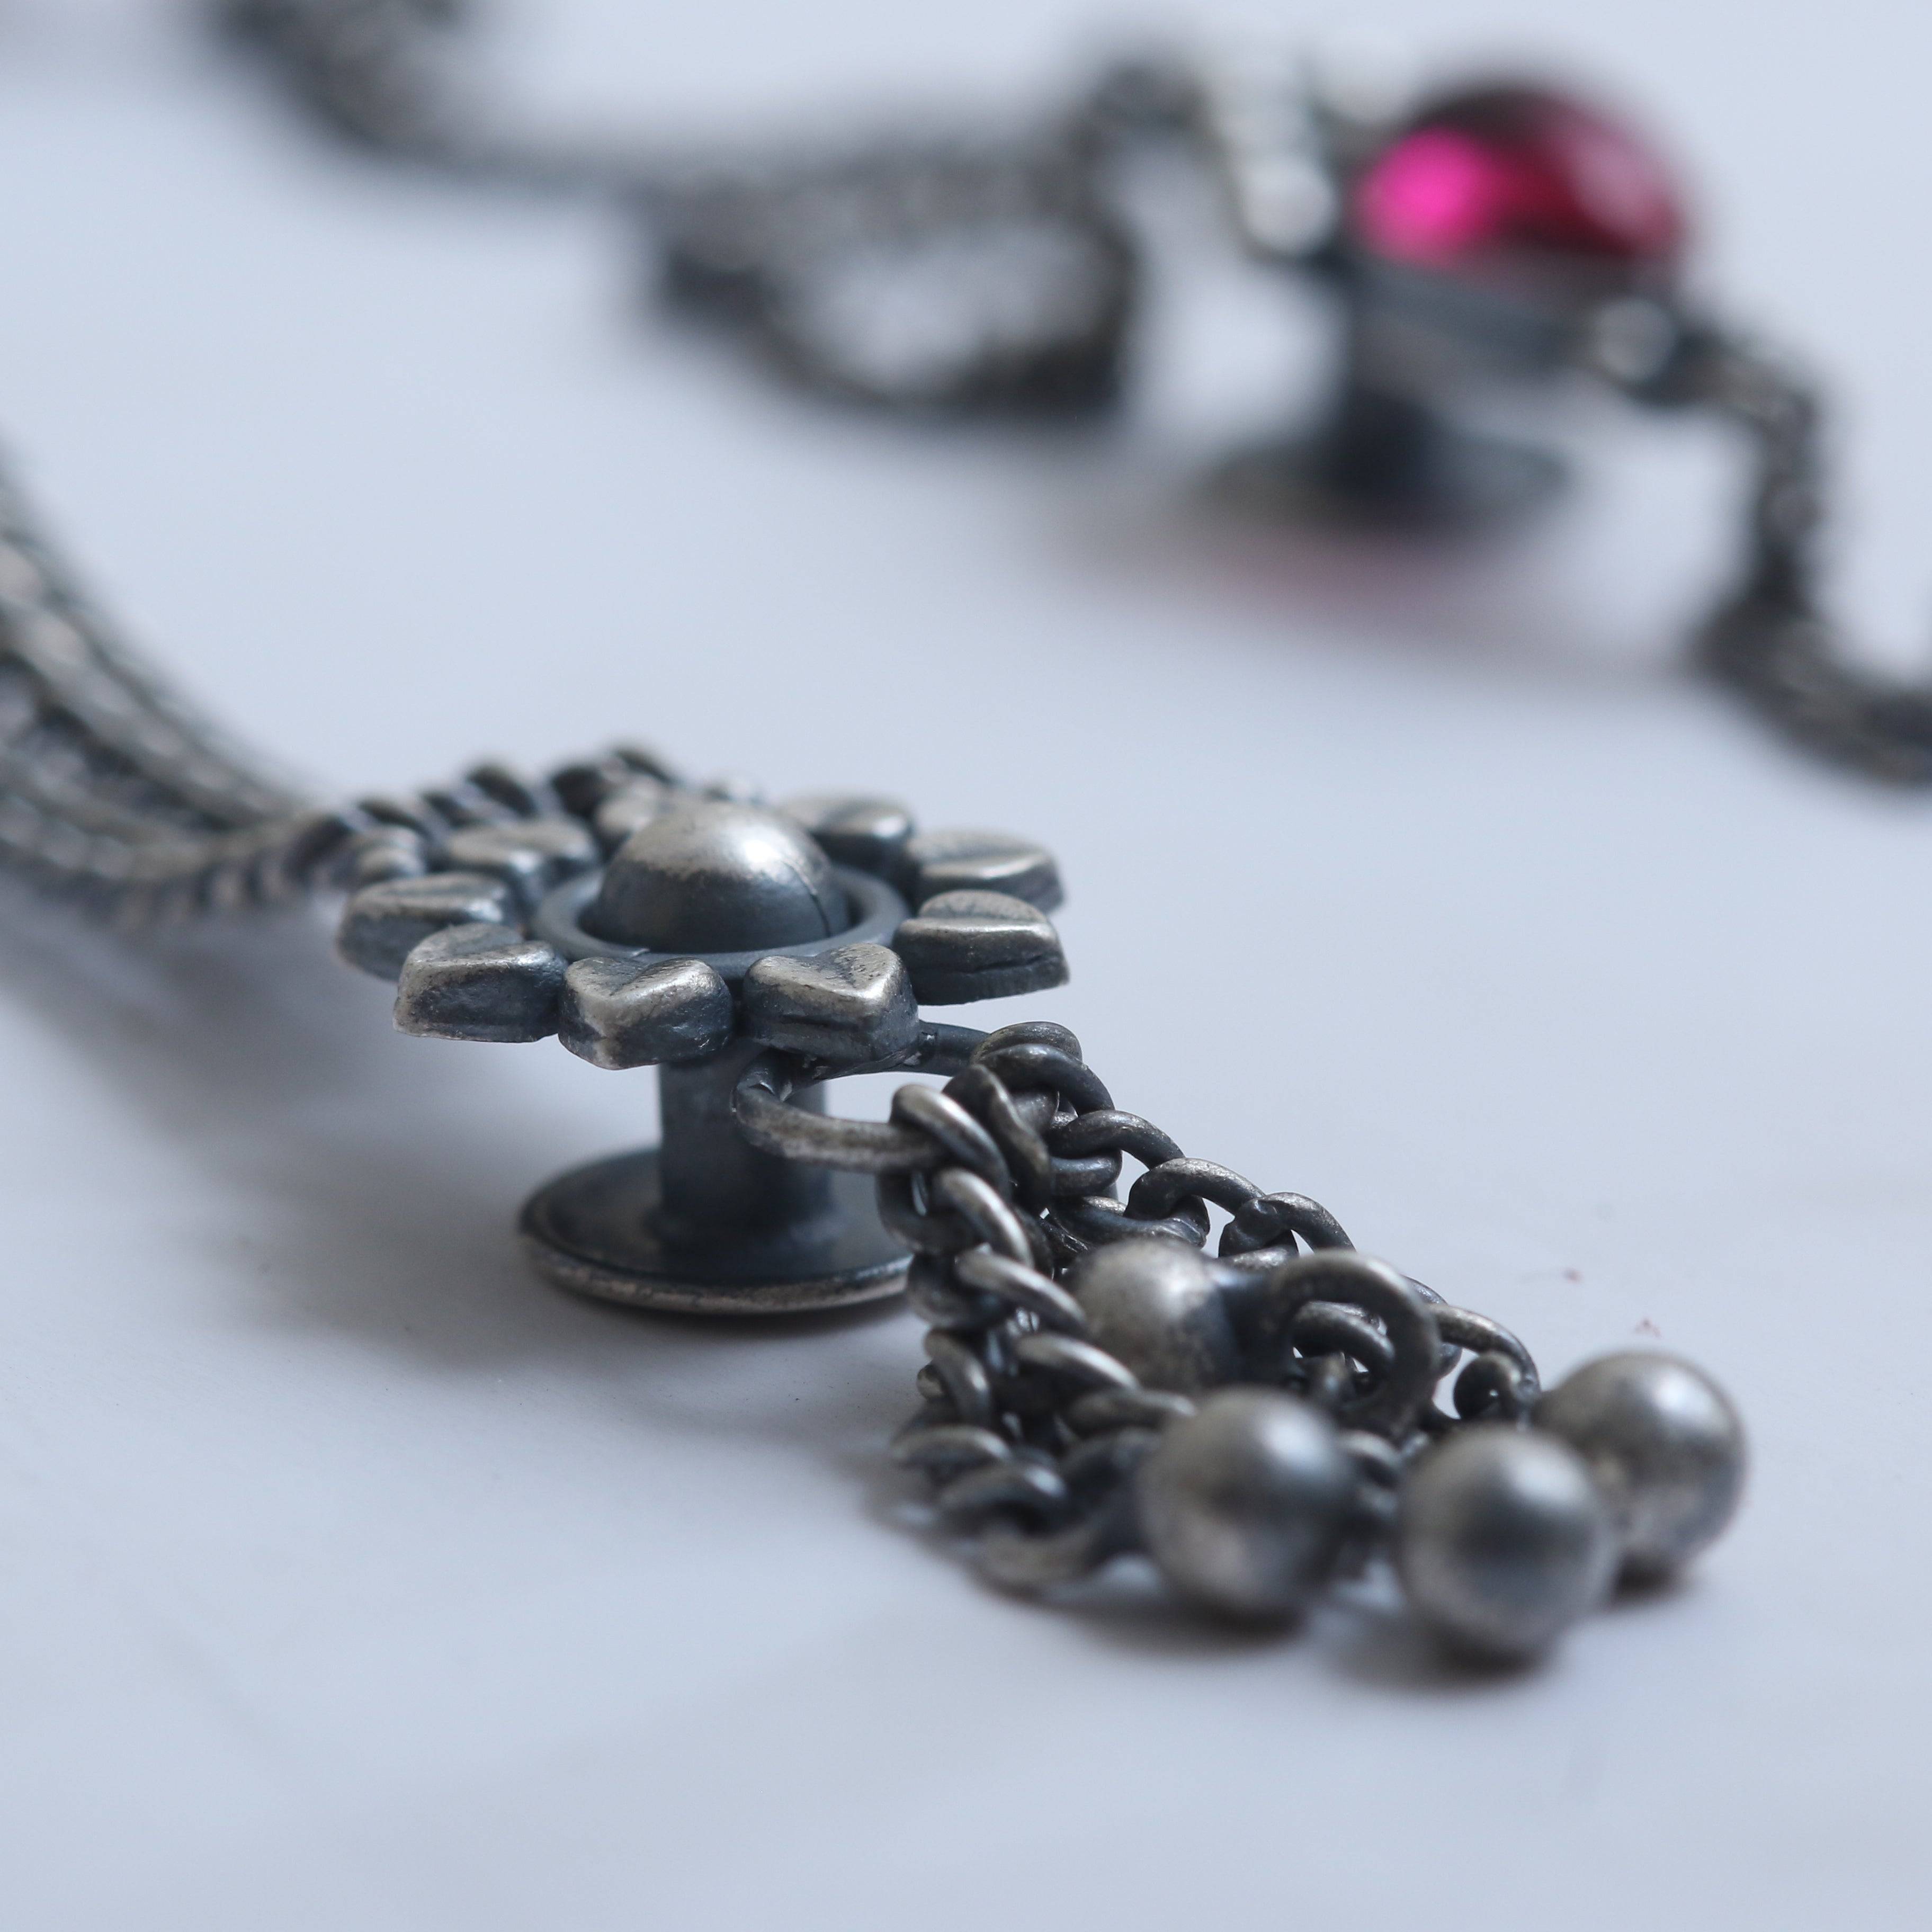 a close up of a chain with a red jewel on it